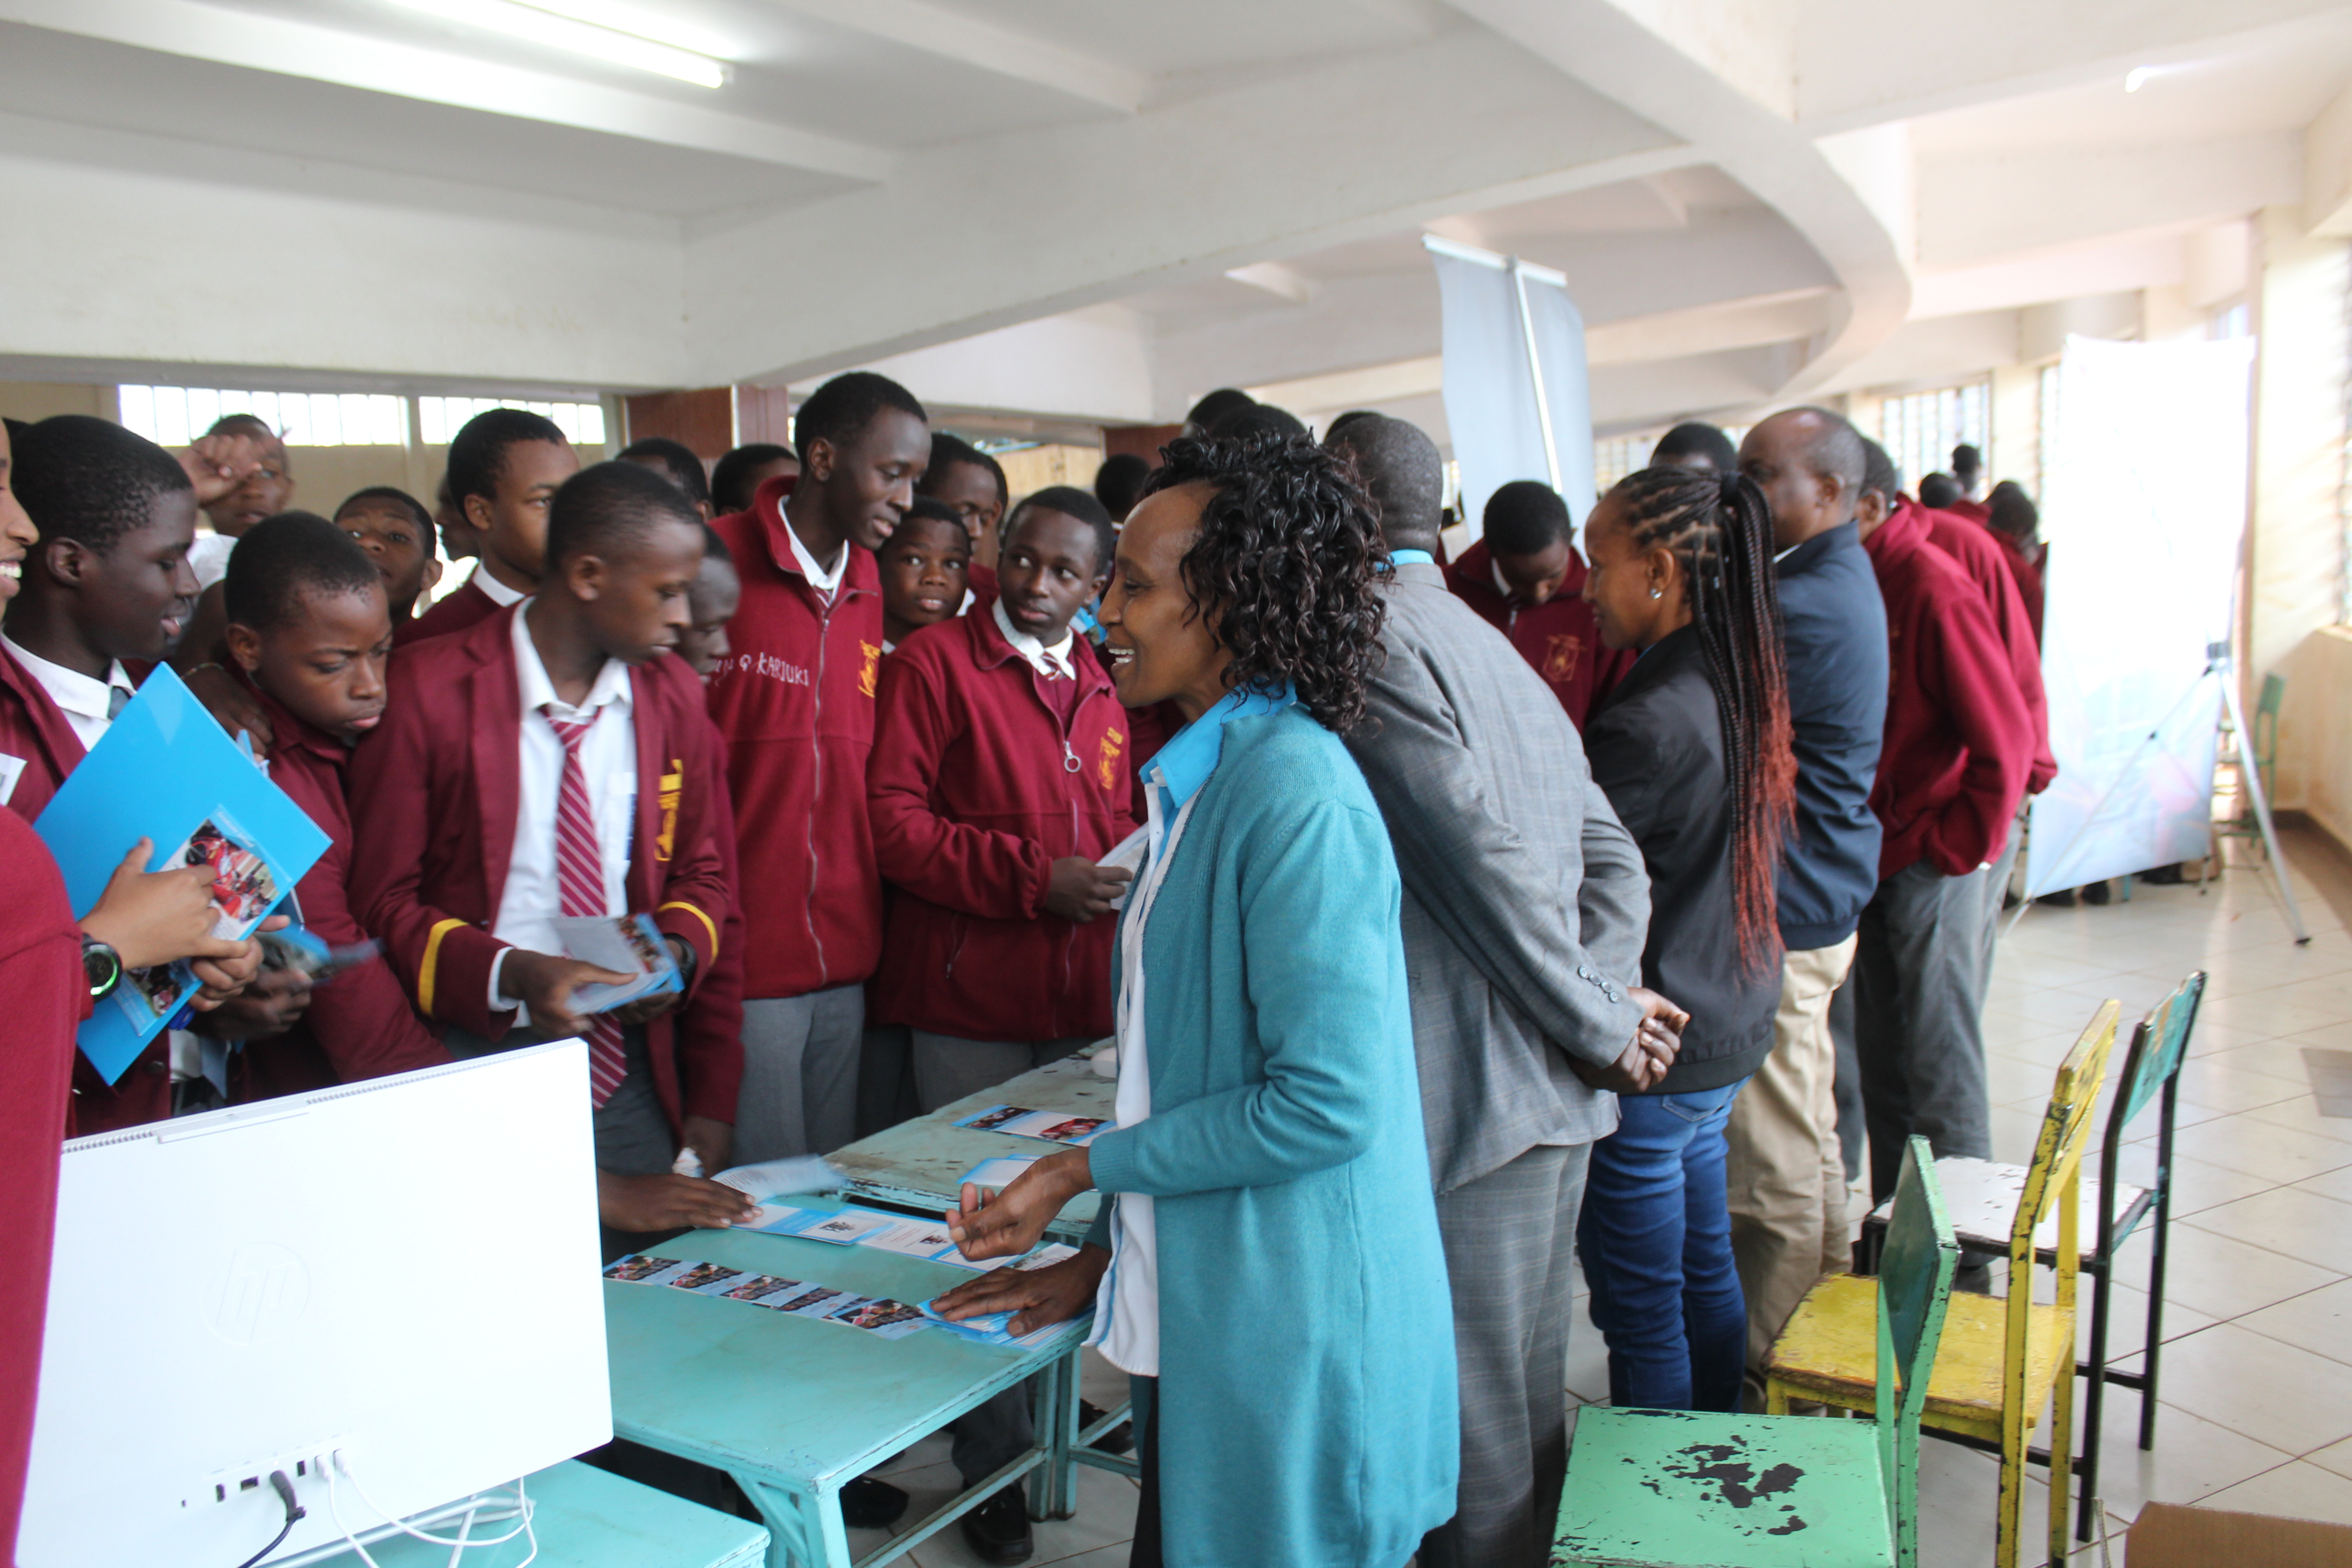 AIC Kyome, Academic visit to UoN on Thursday, 27th October 2022 for career guidance